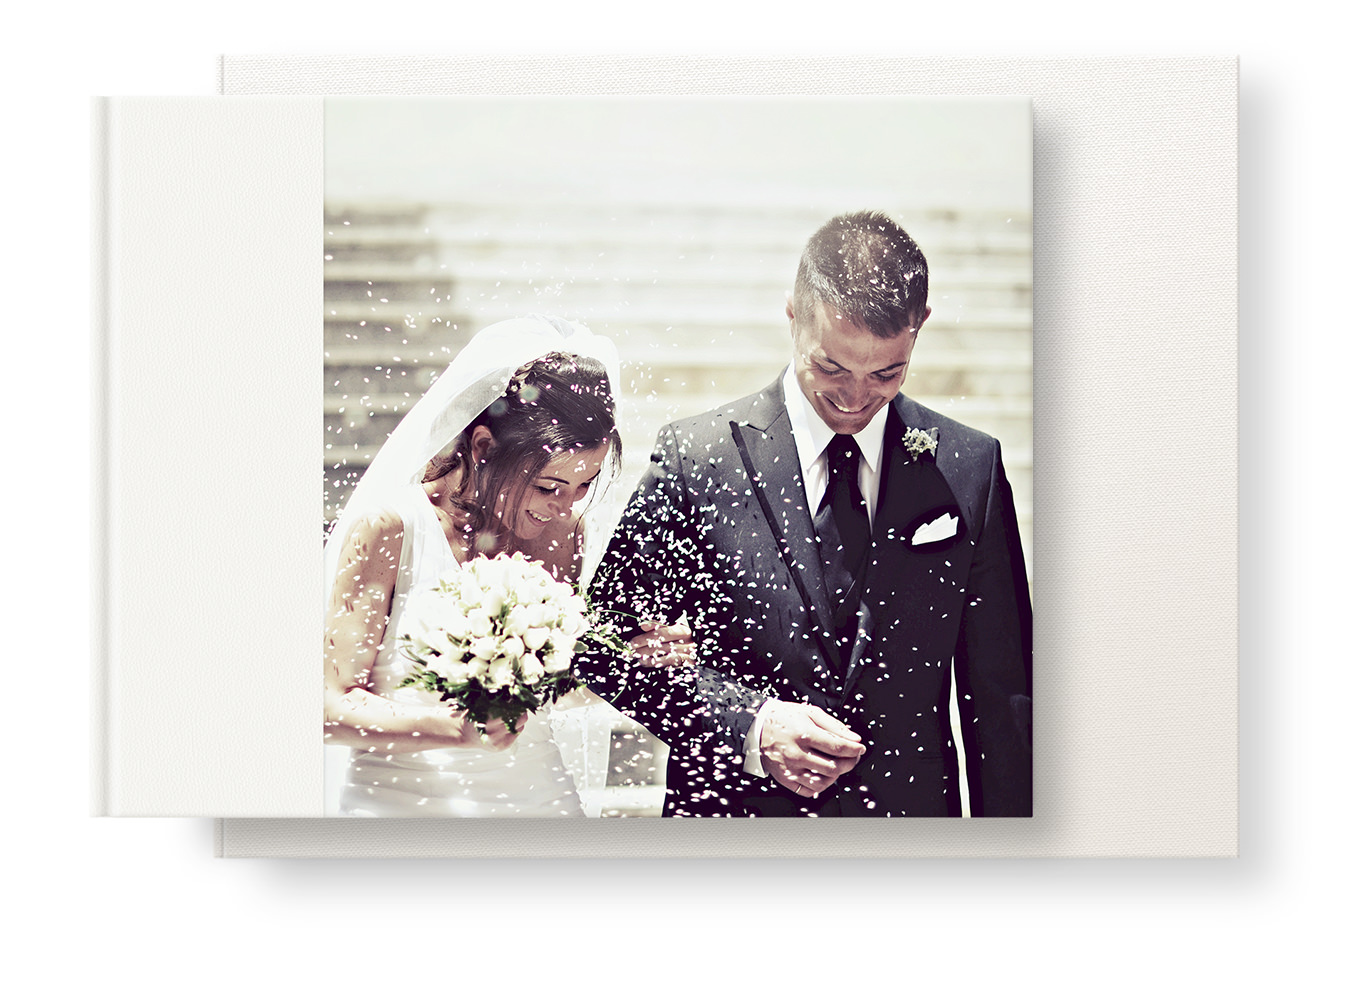 Presentation box and a landscape wedding album with a cover image of a bride and groom on their wedding day.